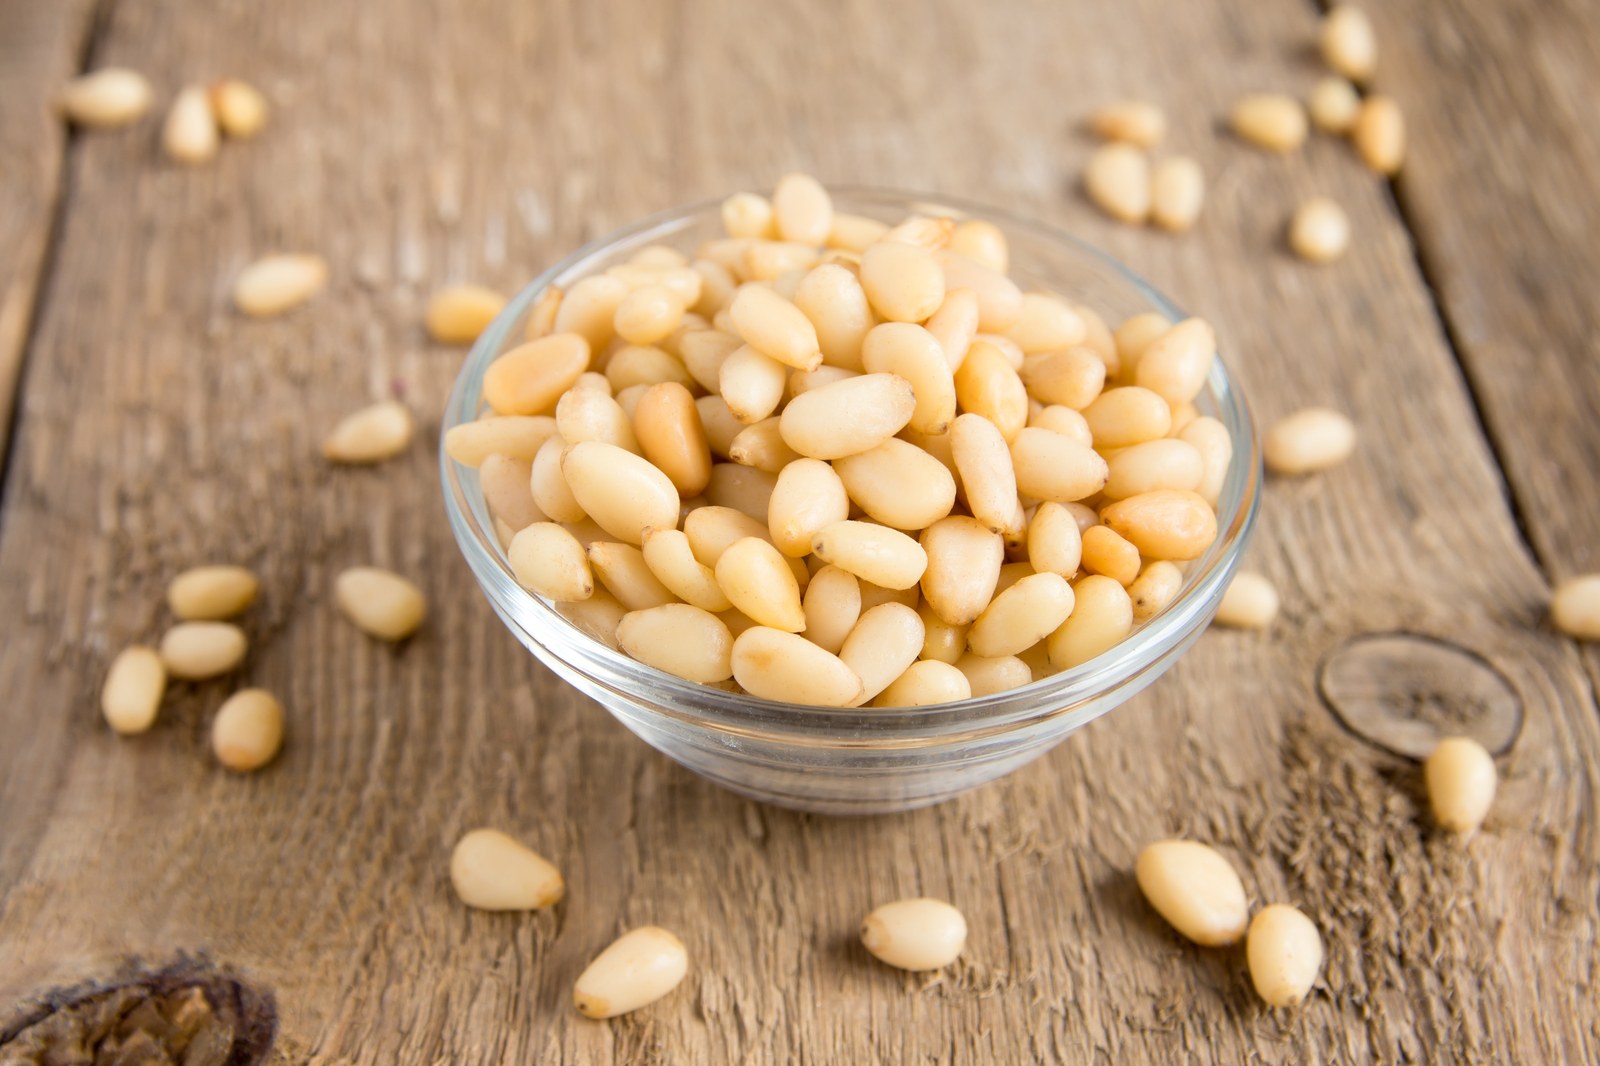 💖 If You Like Eating 27/35 of These Aphrodisiacs, You’re a 🥰 Real Romantic Pine Nuts